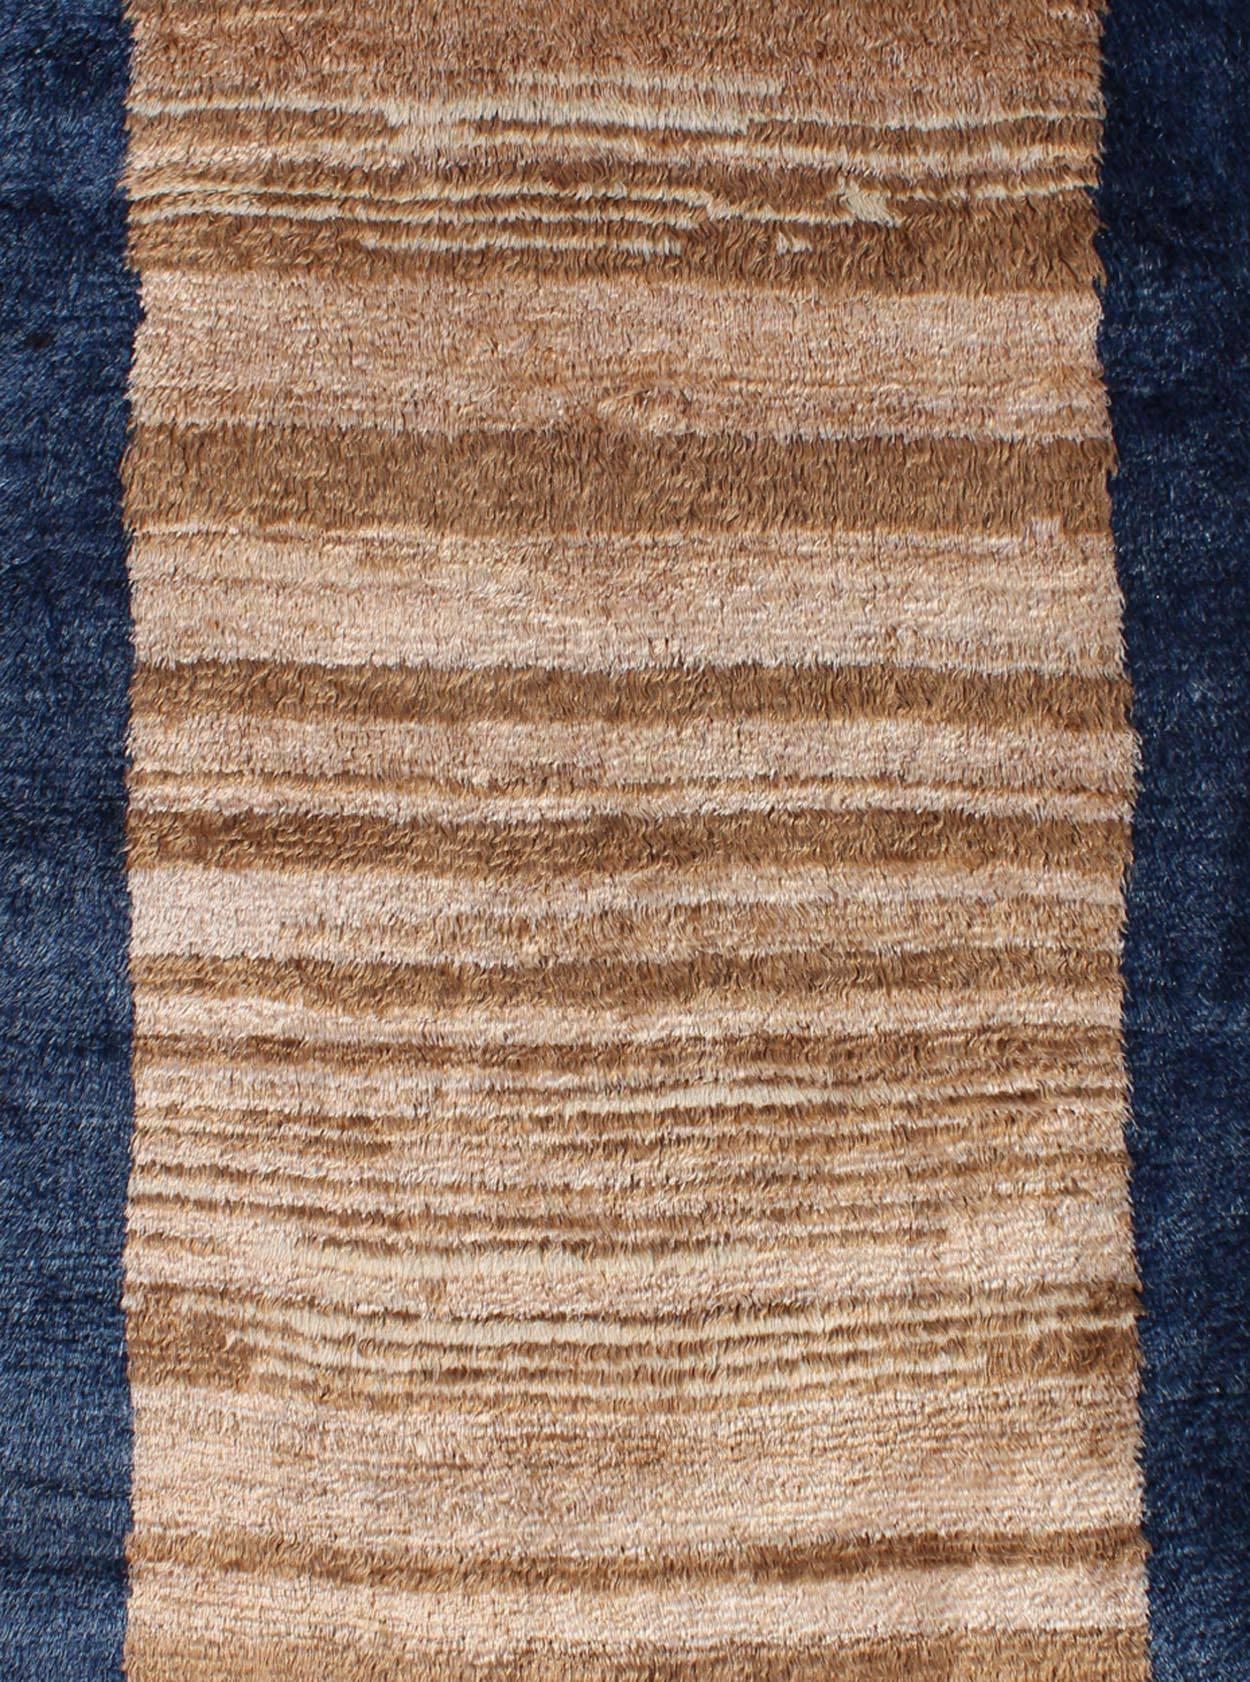 Hand-Knotted Angora Turkish Tulu Rug with Solid Field in Shades of Brown and Midnight Blue For Sale